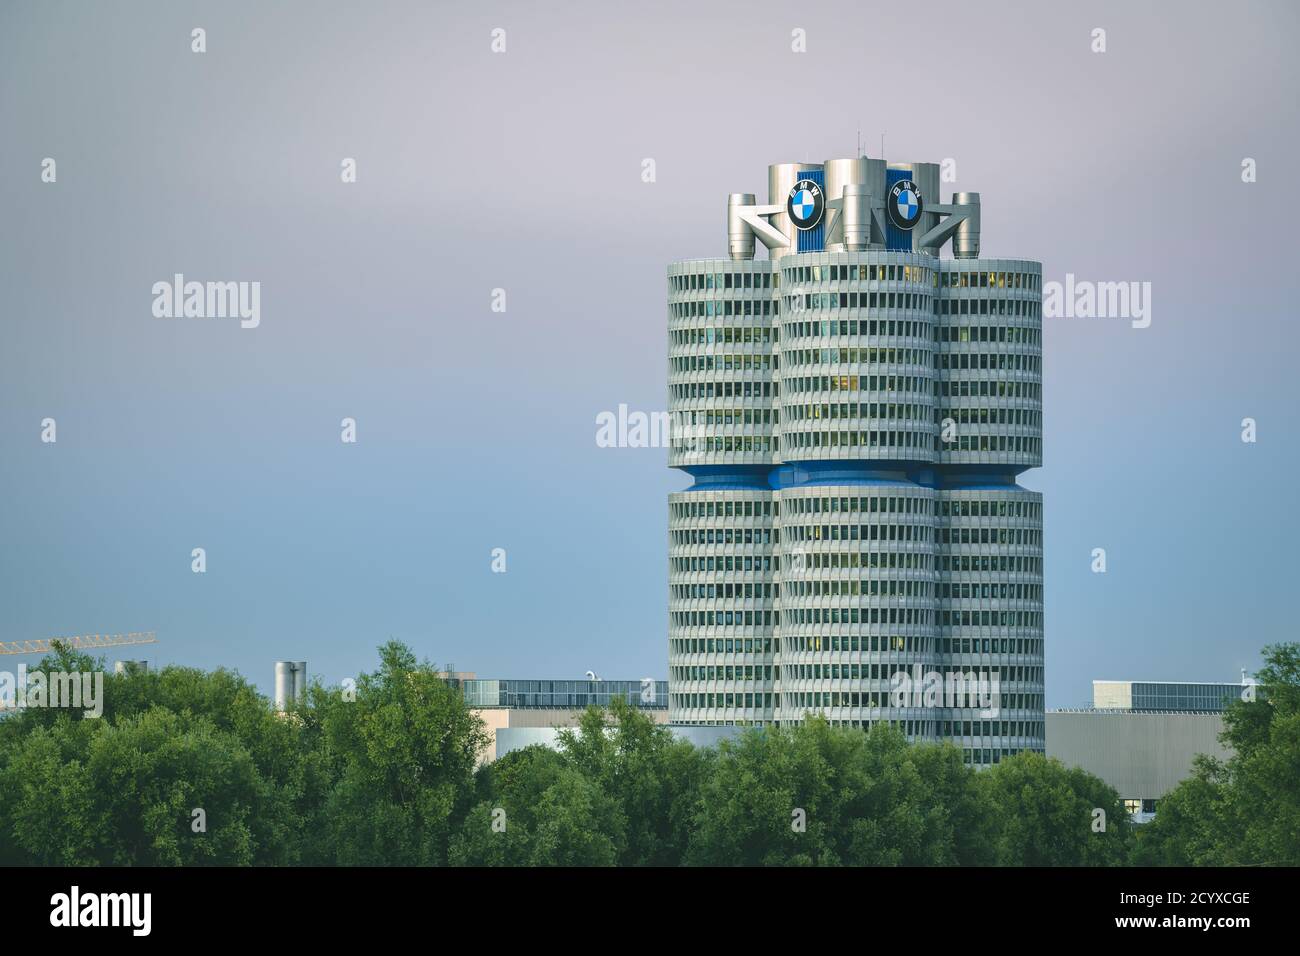 MUNICH, GERMANY - Sep 01, 2020: BMW headquarters in Munich. Modern skyscraper of the Bavarian automobile company in the evening. Stock Photo